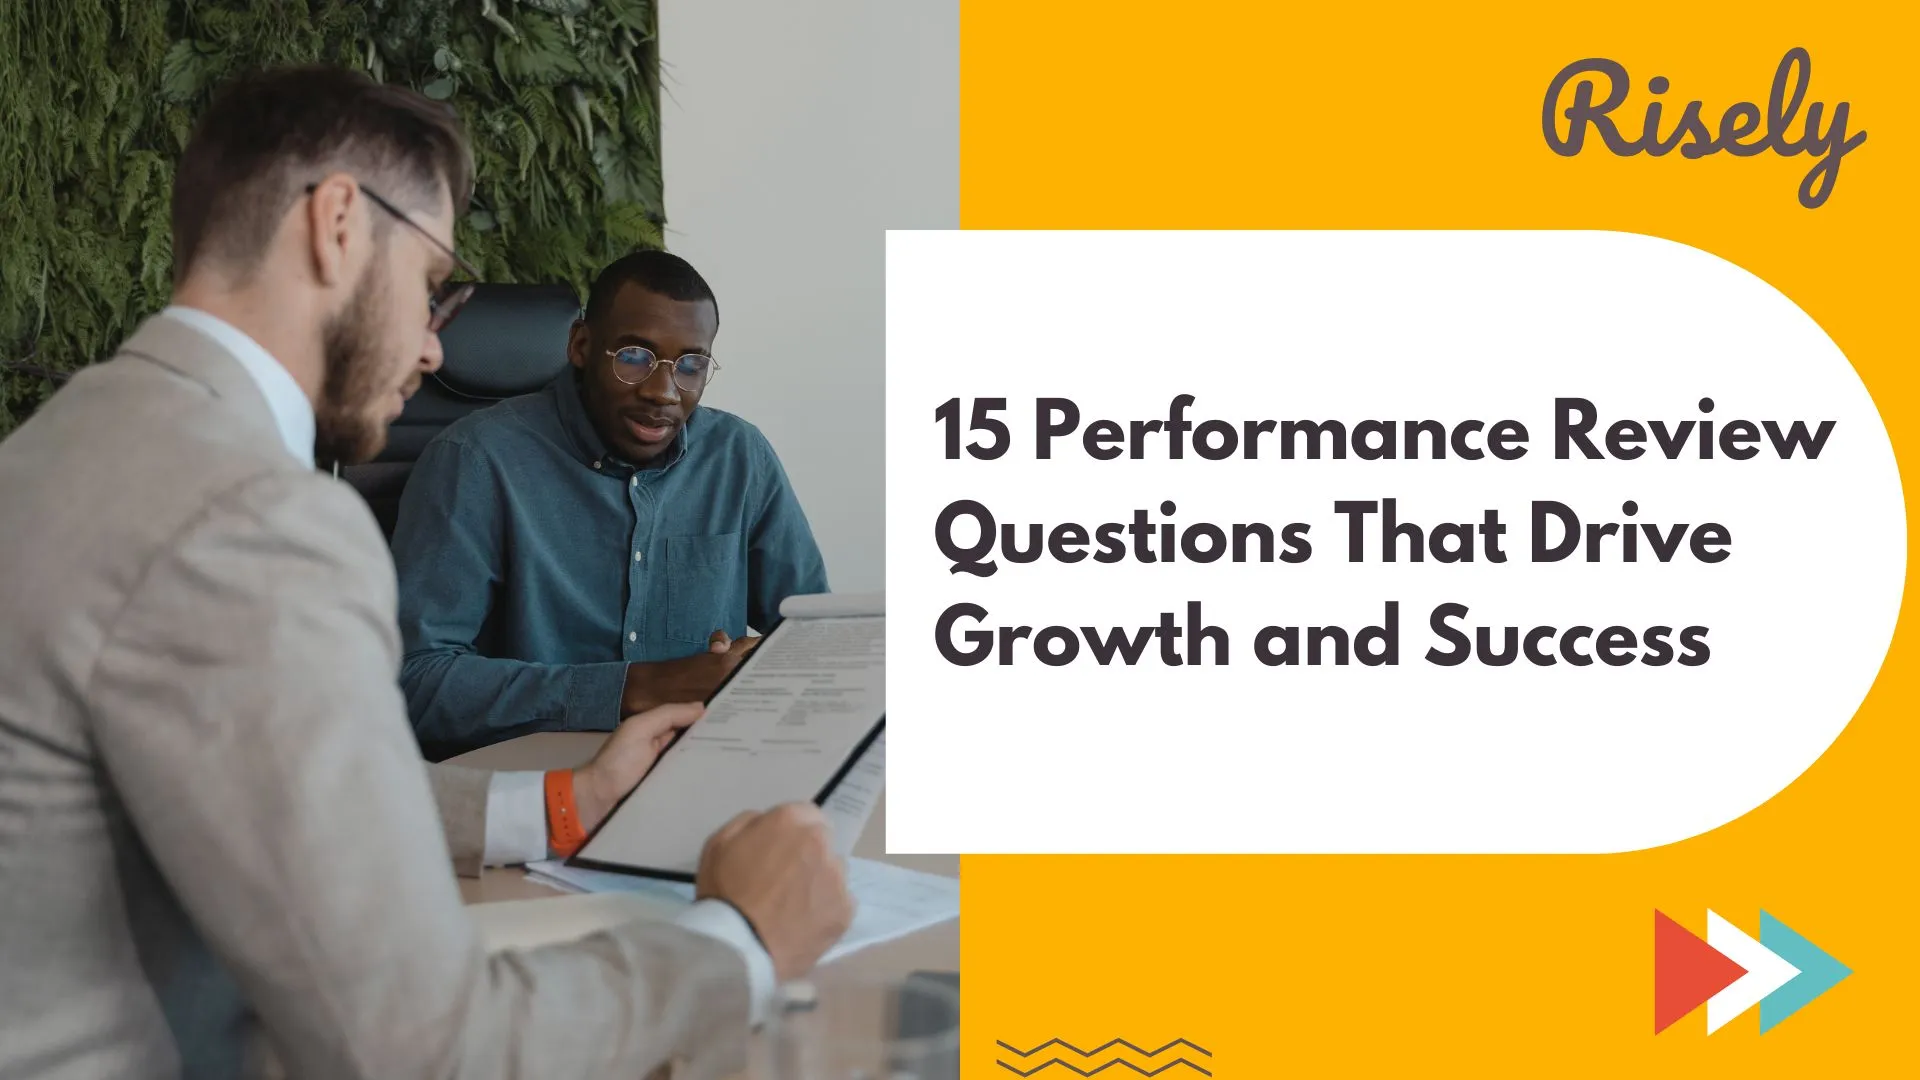 15 Performance Review Questions That Drive Growth and Success